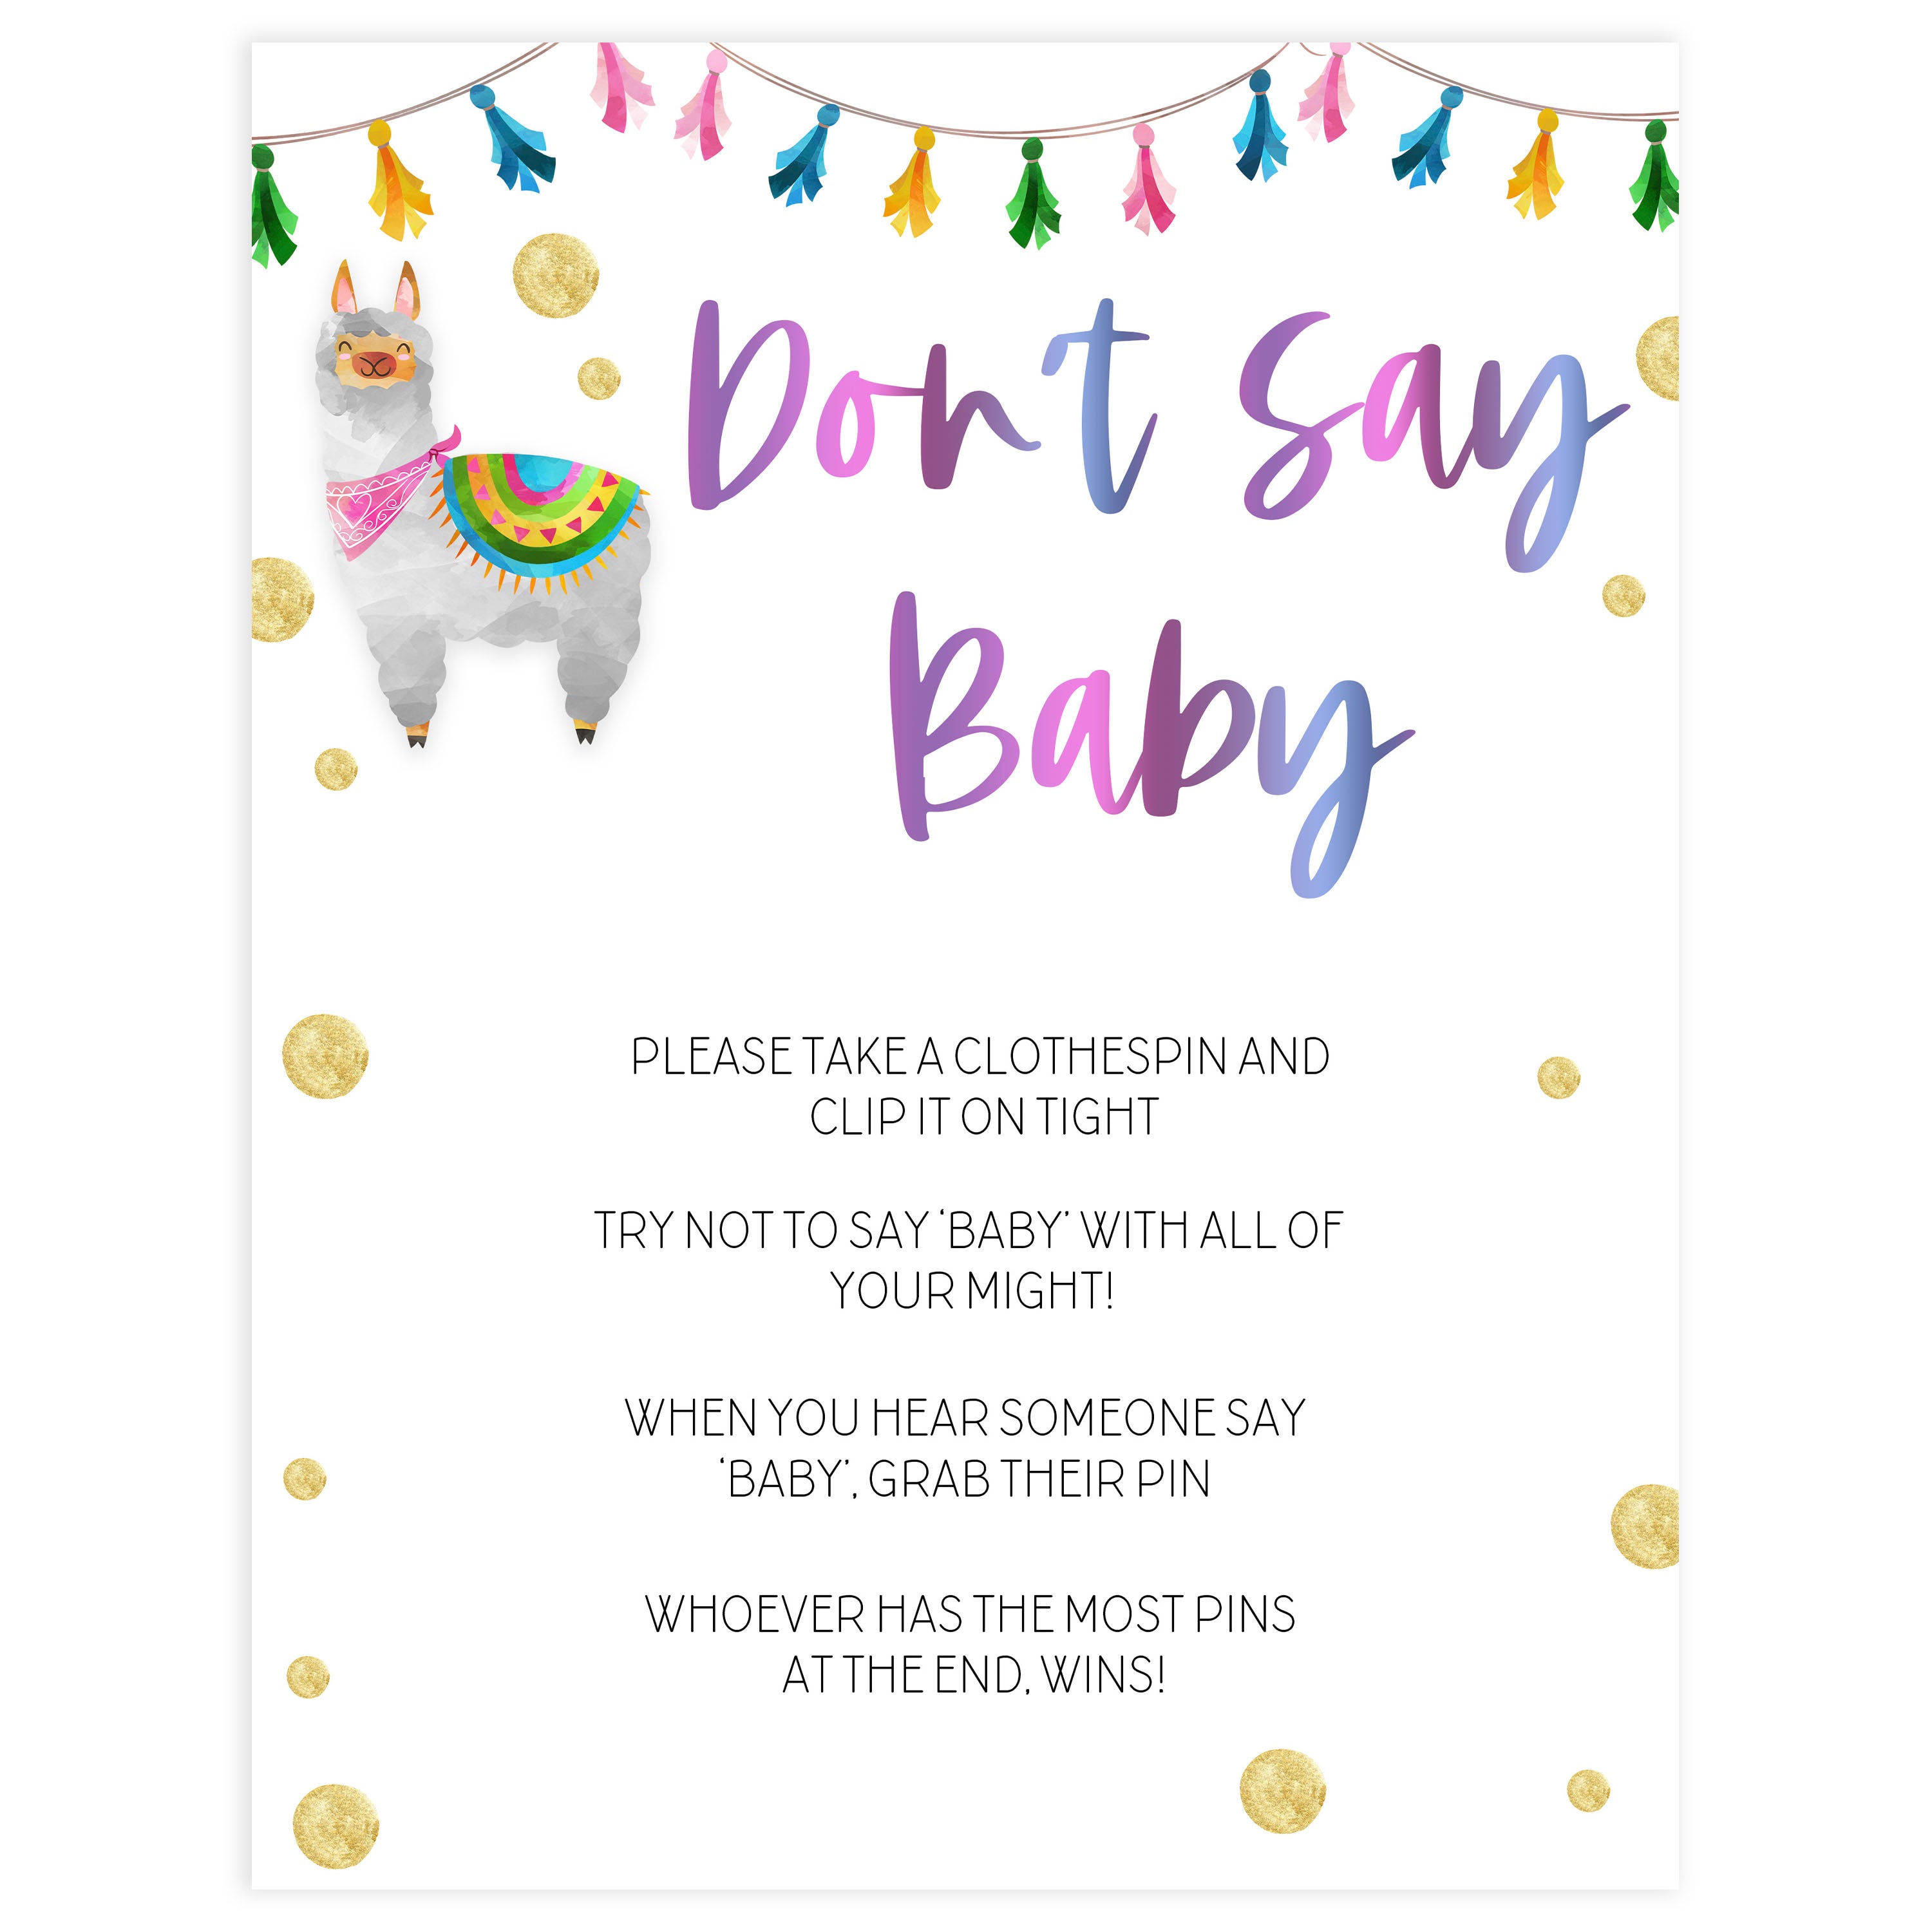 dont say baby game, Printable baby shower games, llama fiesta fun baby games, baby shower games, fun baby shower ideas, top baby shower ideas, Llama fiesta shower baby shower, fiesta baby shower ideas